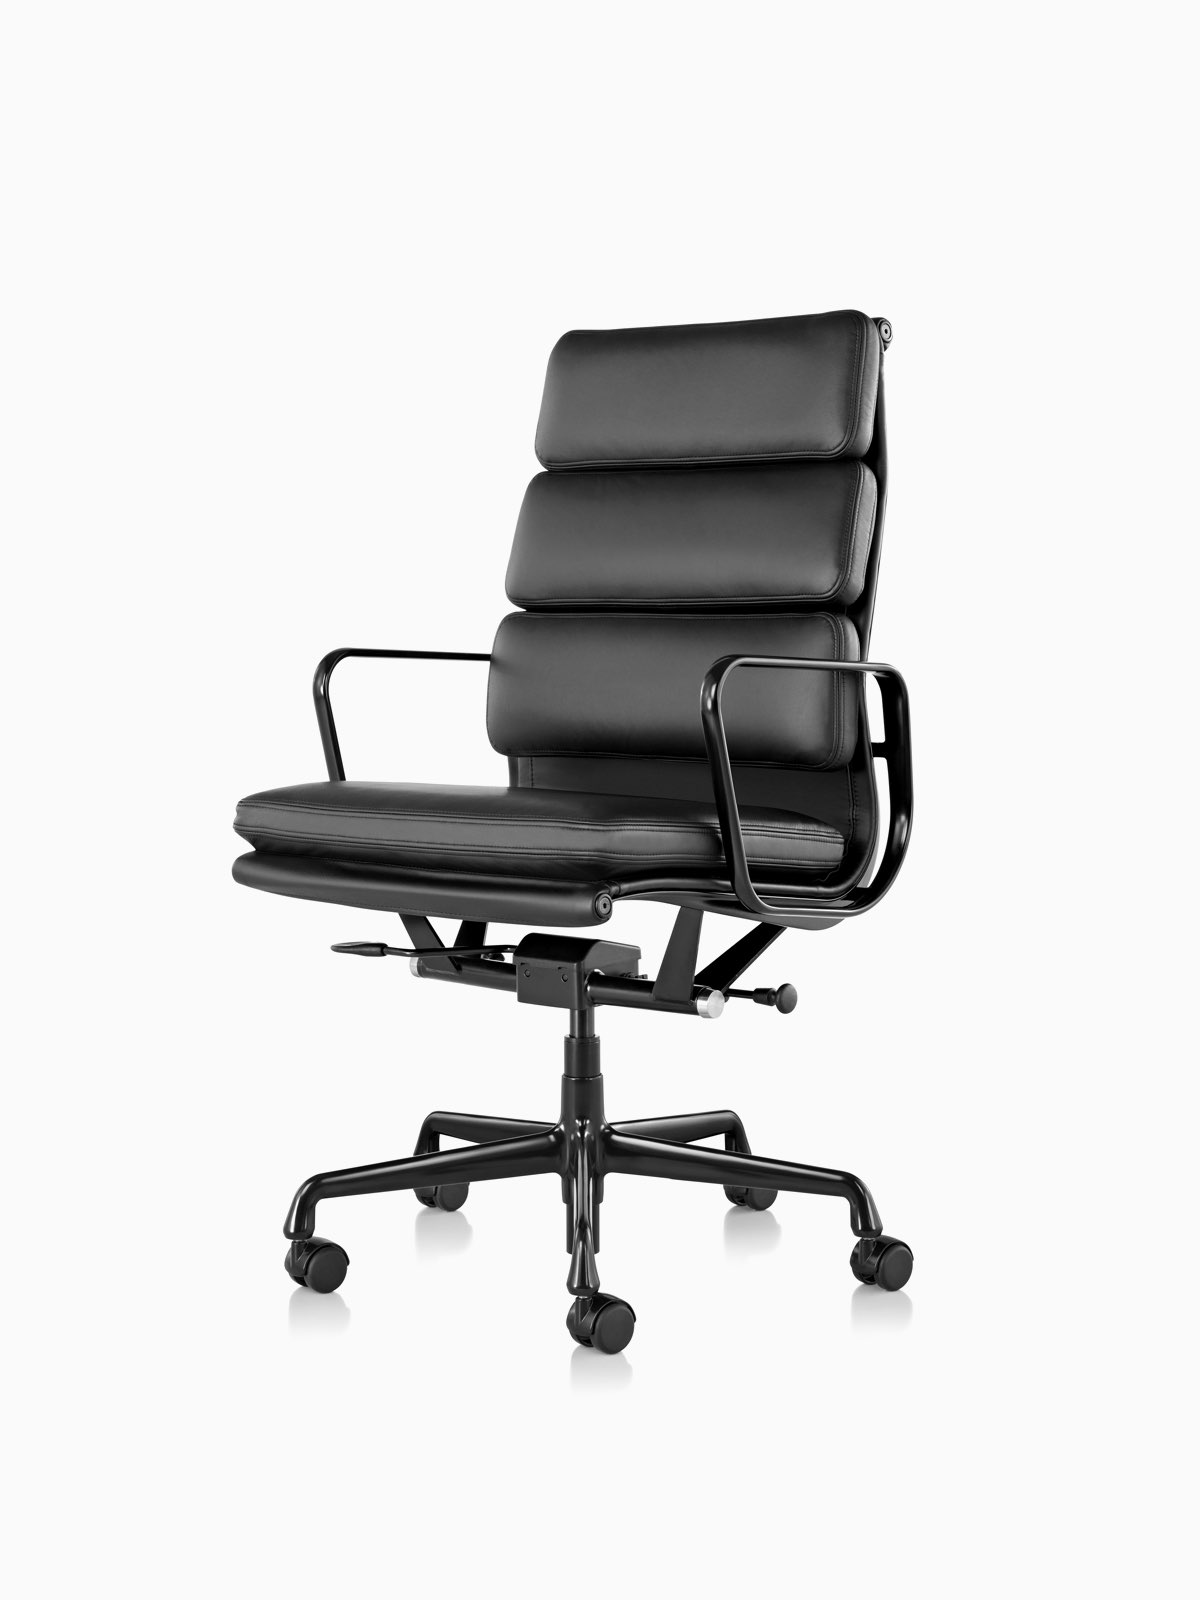 MR5559 Herman Miller Eames Soft Pad Aluminum Group Executive Chair 